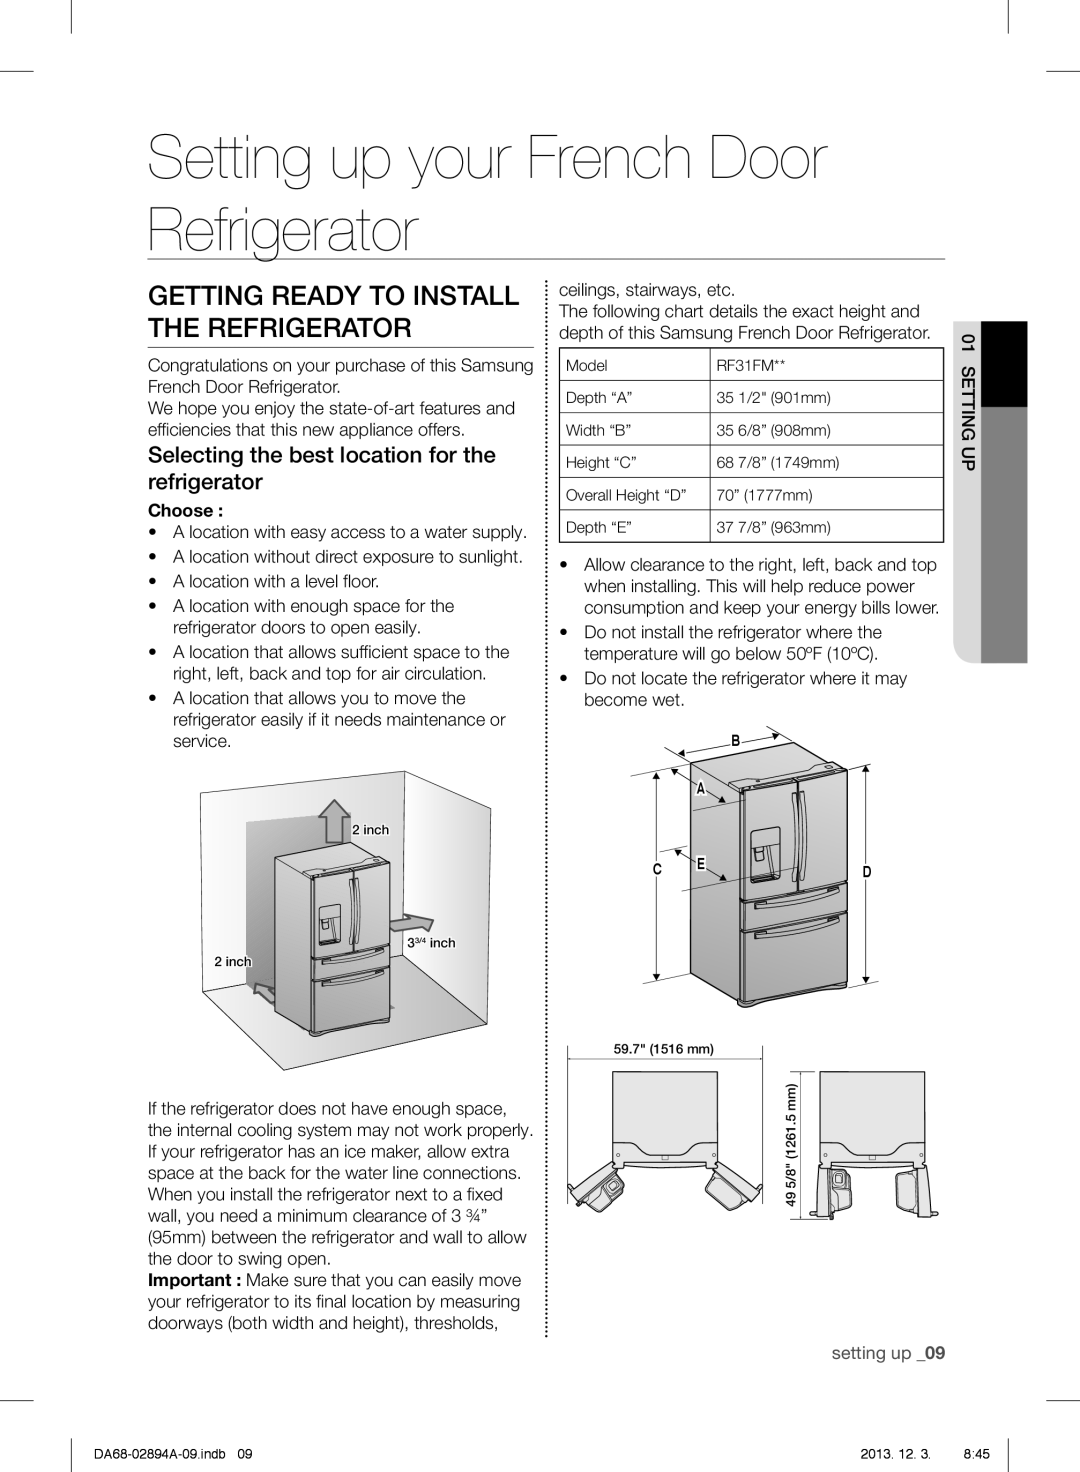 Samsung RF31FMEDBSR Setting up your French Door Refrigerator, Getting Ready To Install The Refrigerator, setting up 